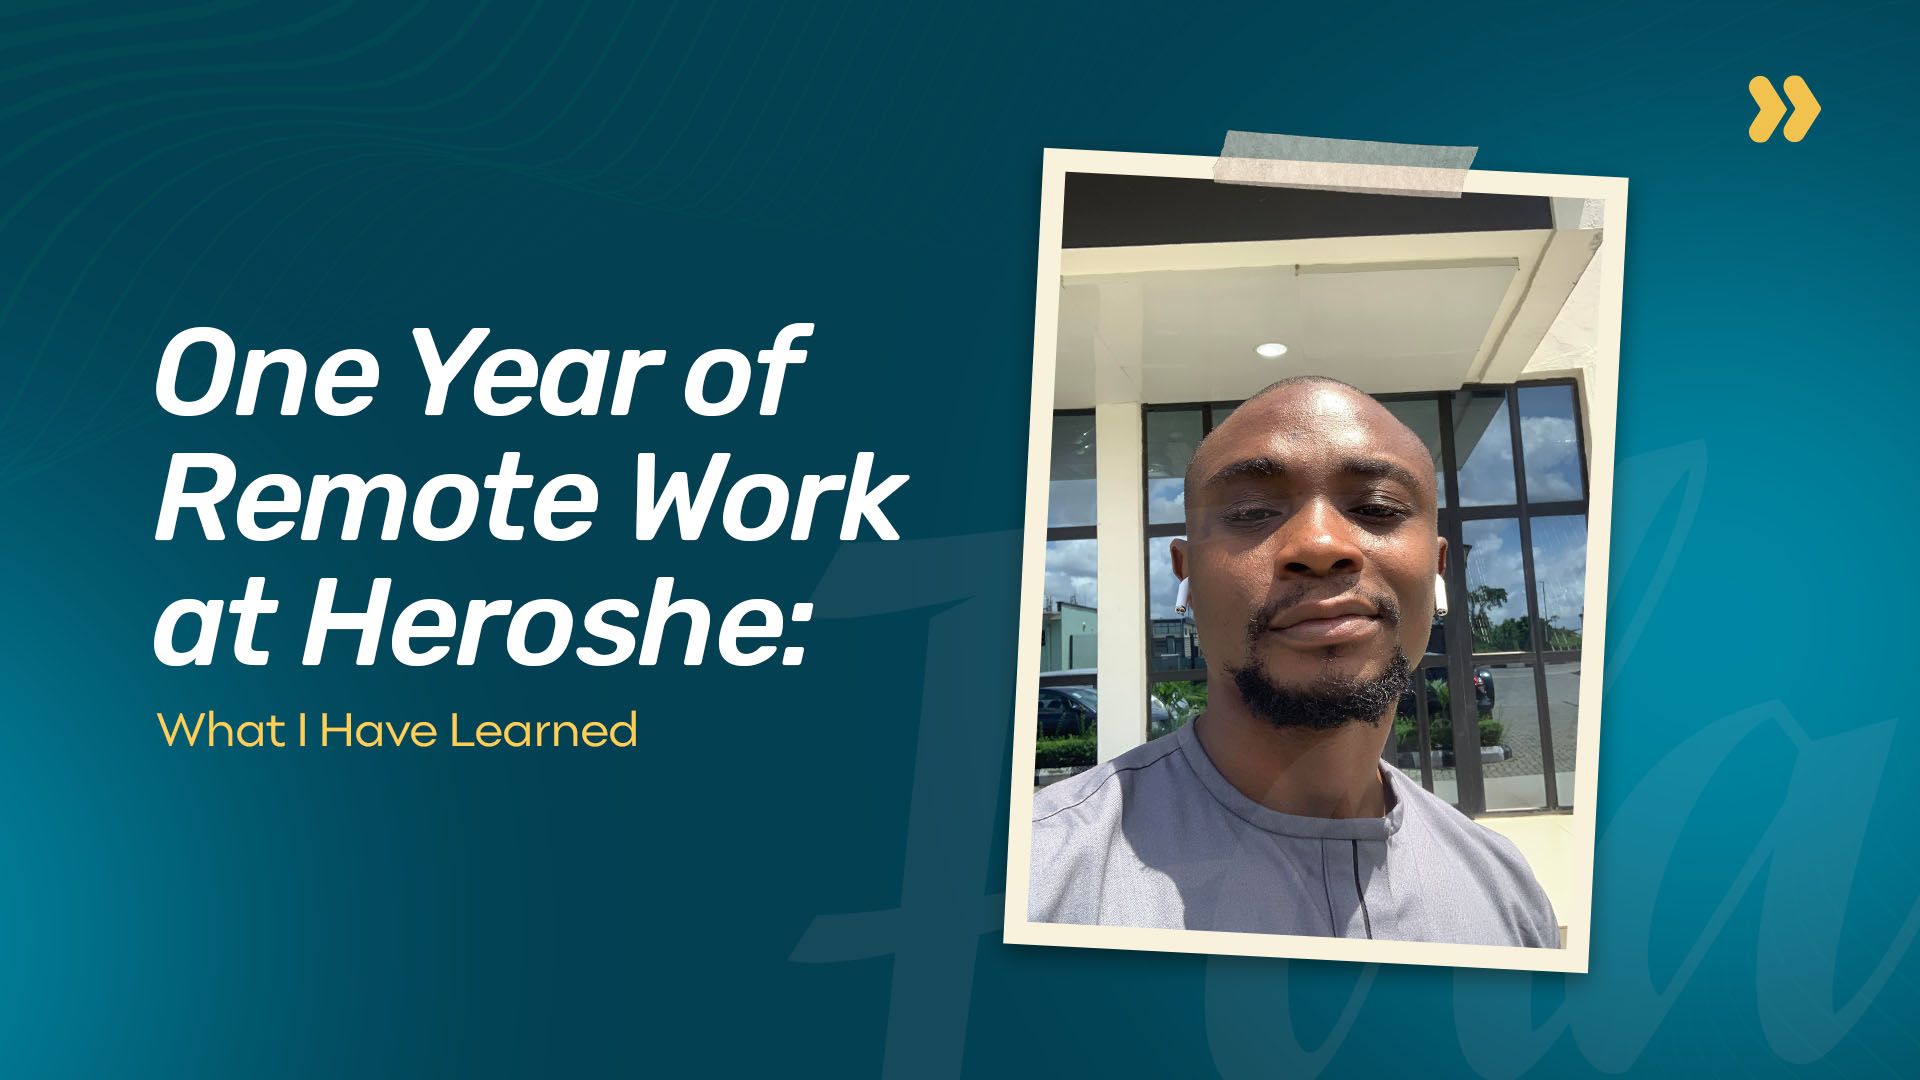 One Year of Remote Work at Heroshe: What I Have Learned